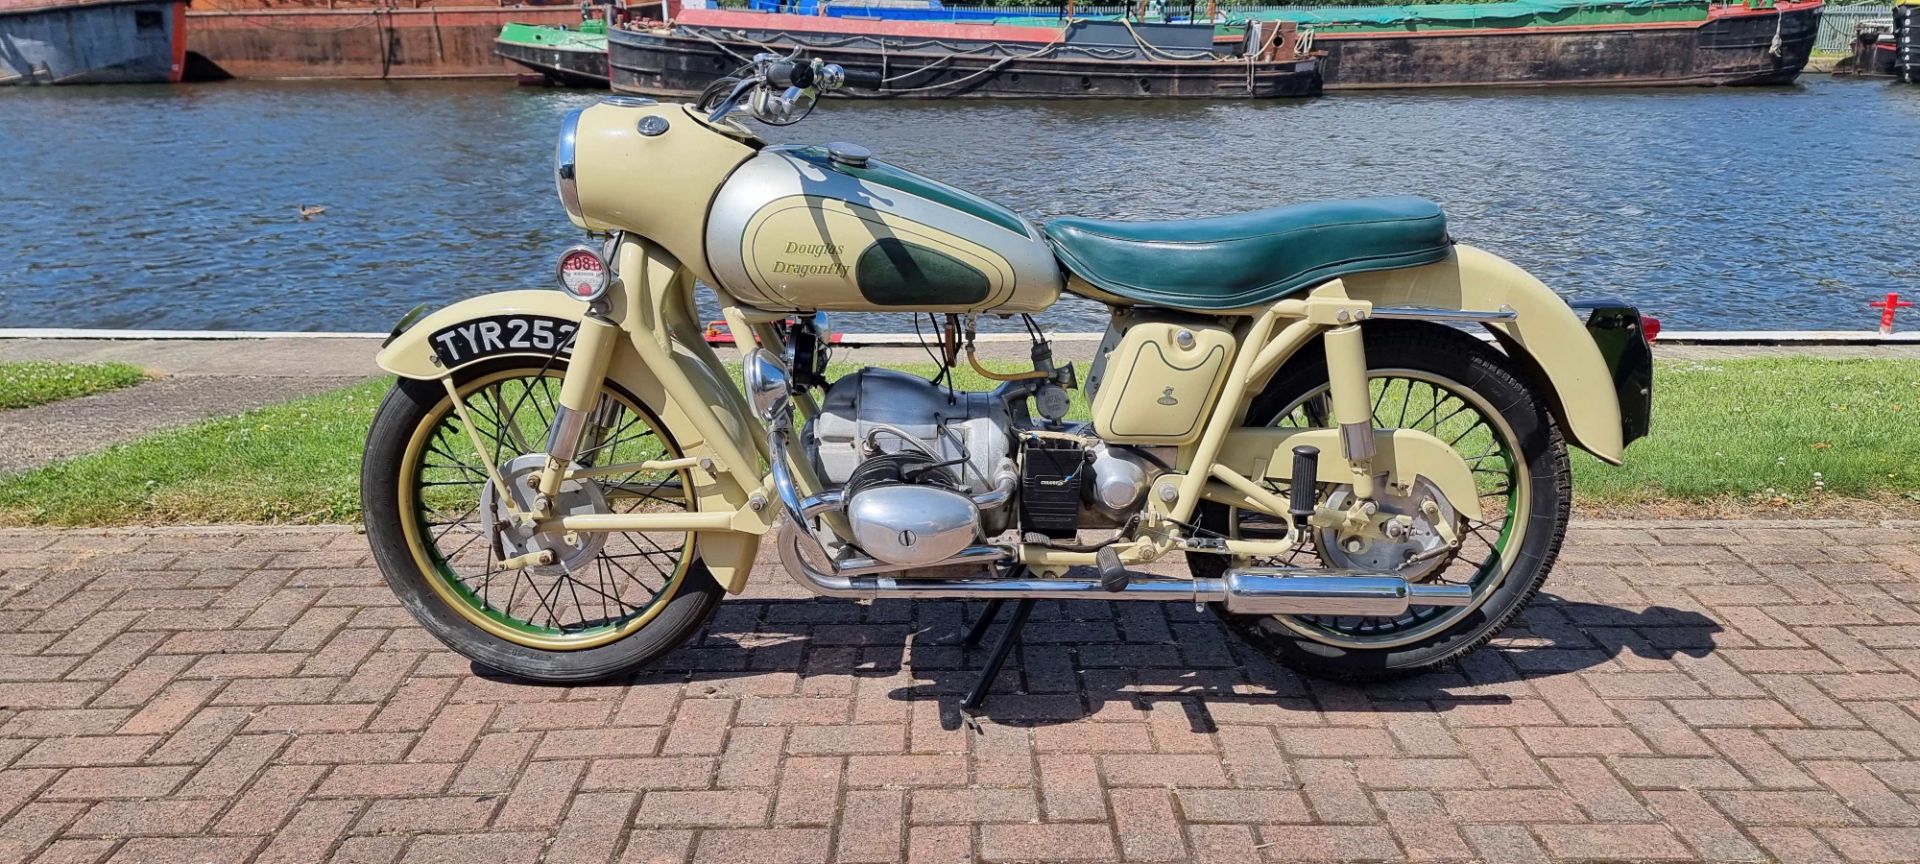 1957 Douglas Dragonfly, 350 cc. Registration number TYR 252 (non transferable). Frame number 1584/6. - Image 2 of 12